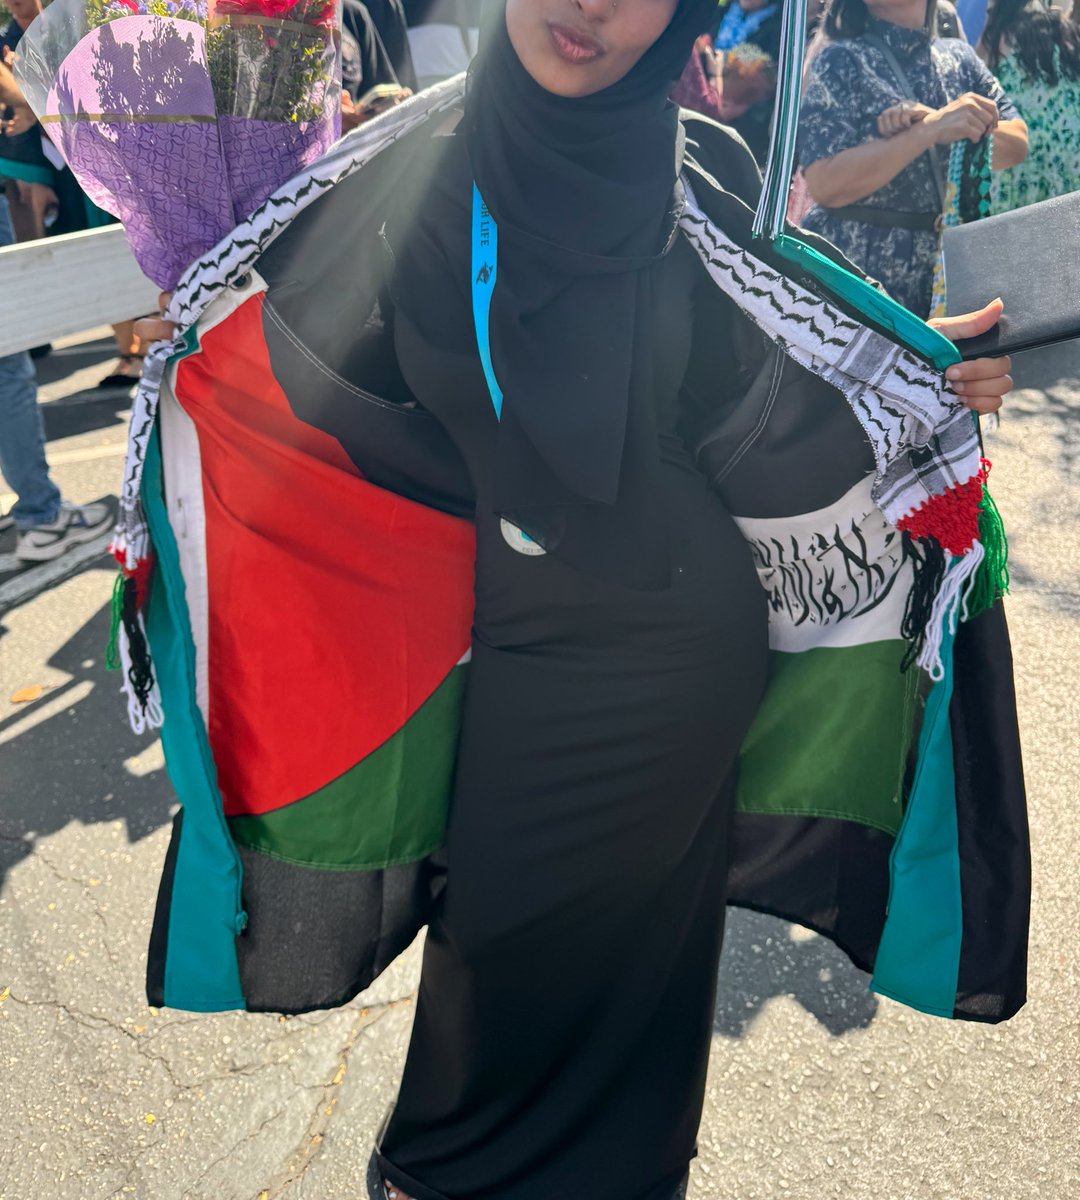 Our little graduate got her graduation hat taken away, so she pinned the Palestinian flag on the inside of her robe and opened it in the middle of the stage